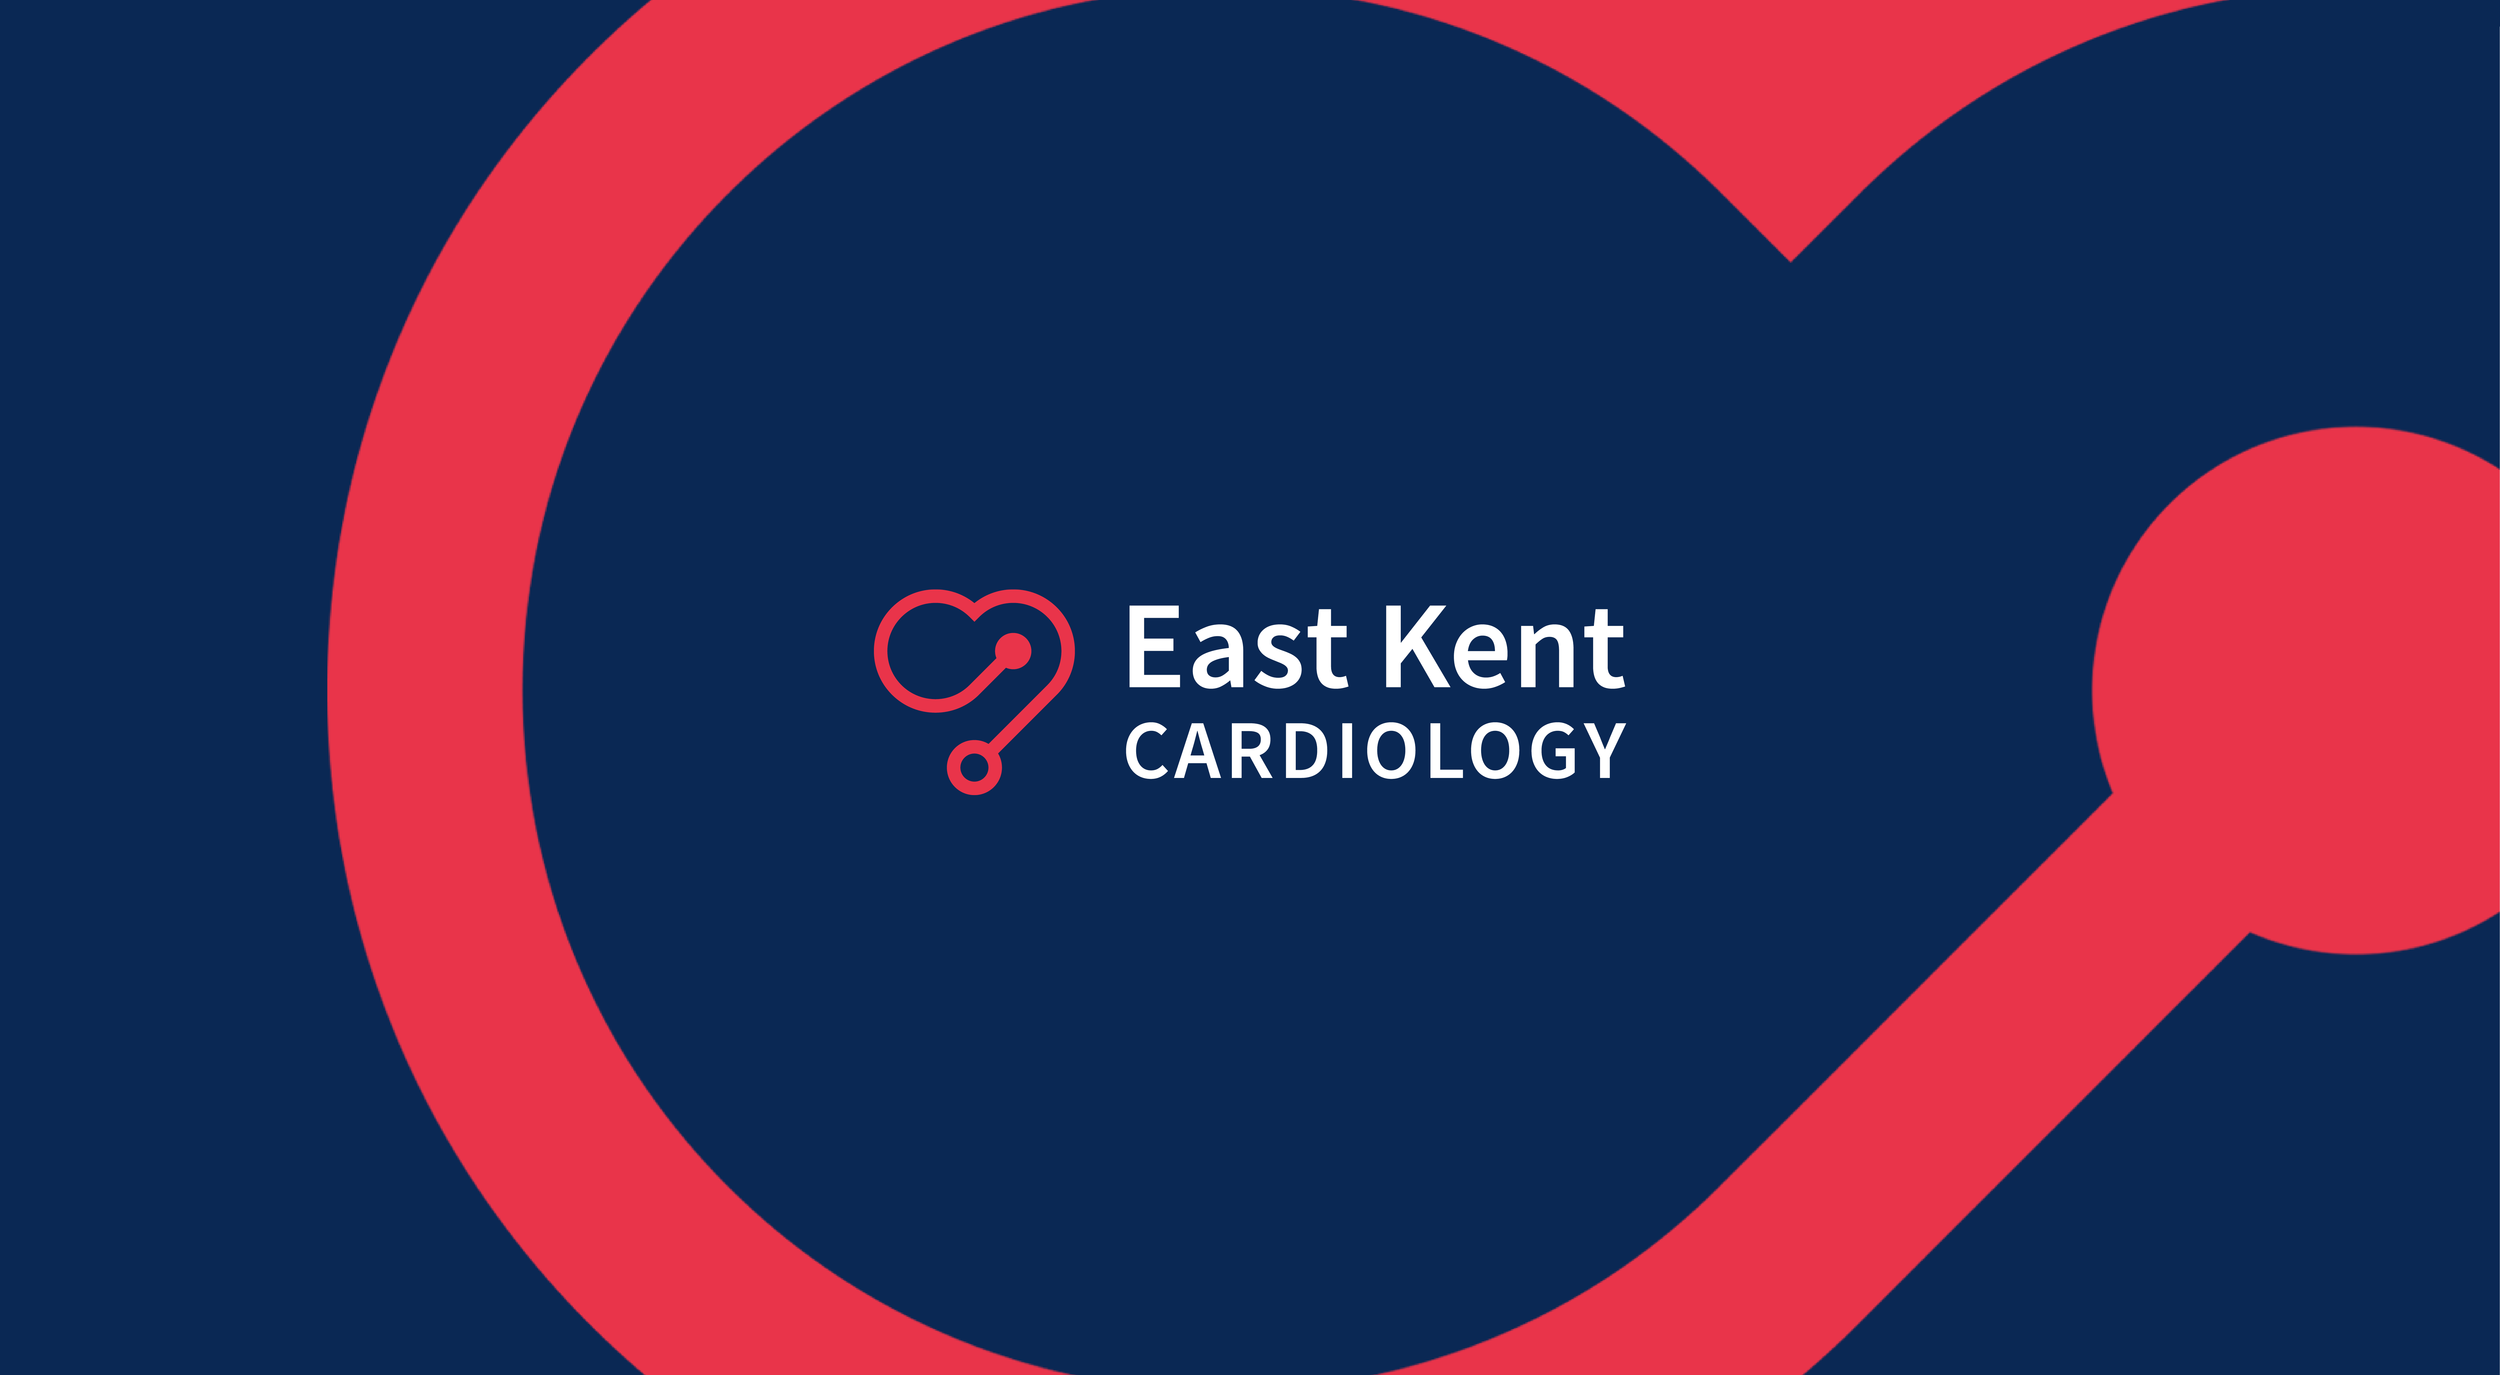 West End Cardiology Brand Identity and Website :: Behance